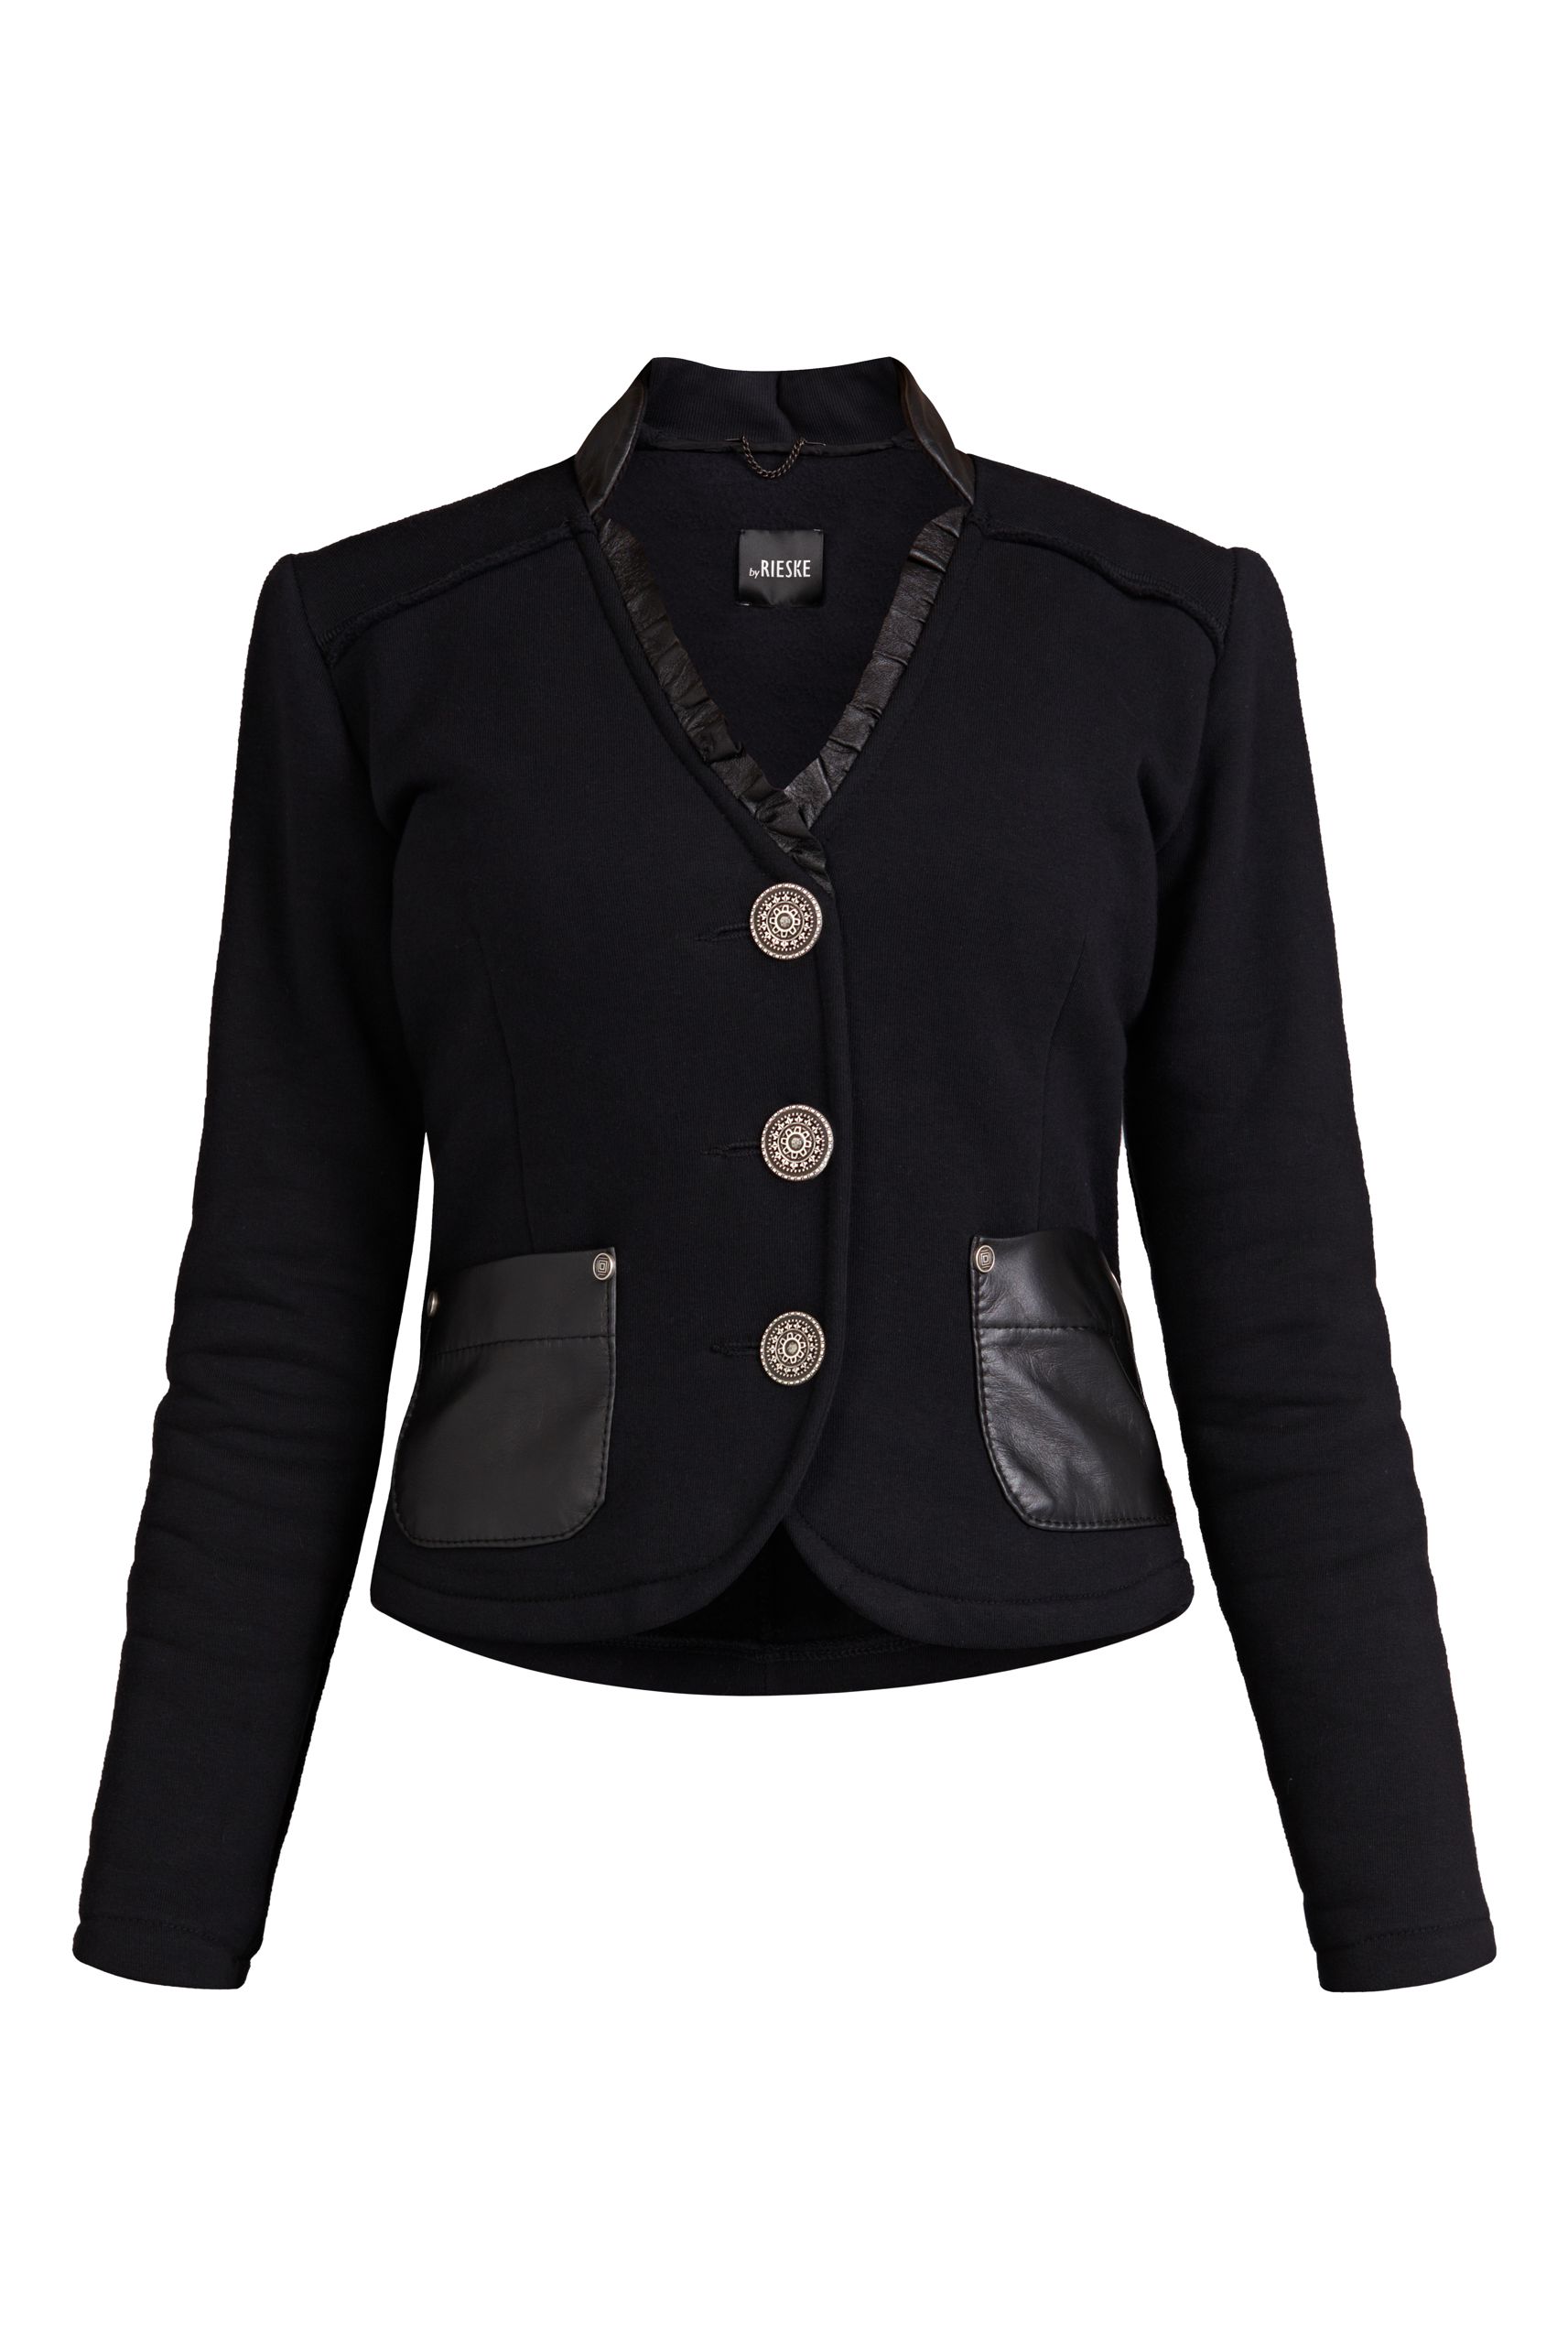 220012 JACKET WITH LEATHER FRILLS BLACK - By Rieske image 4